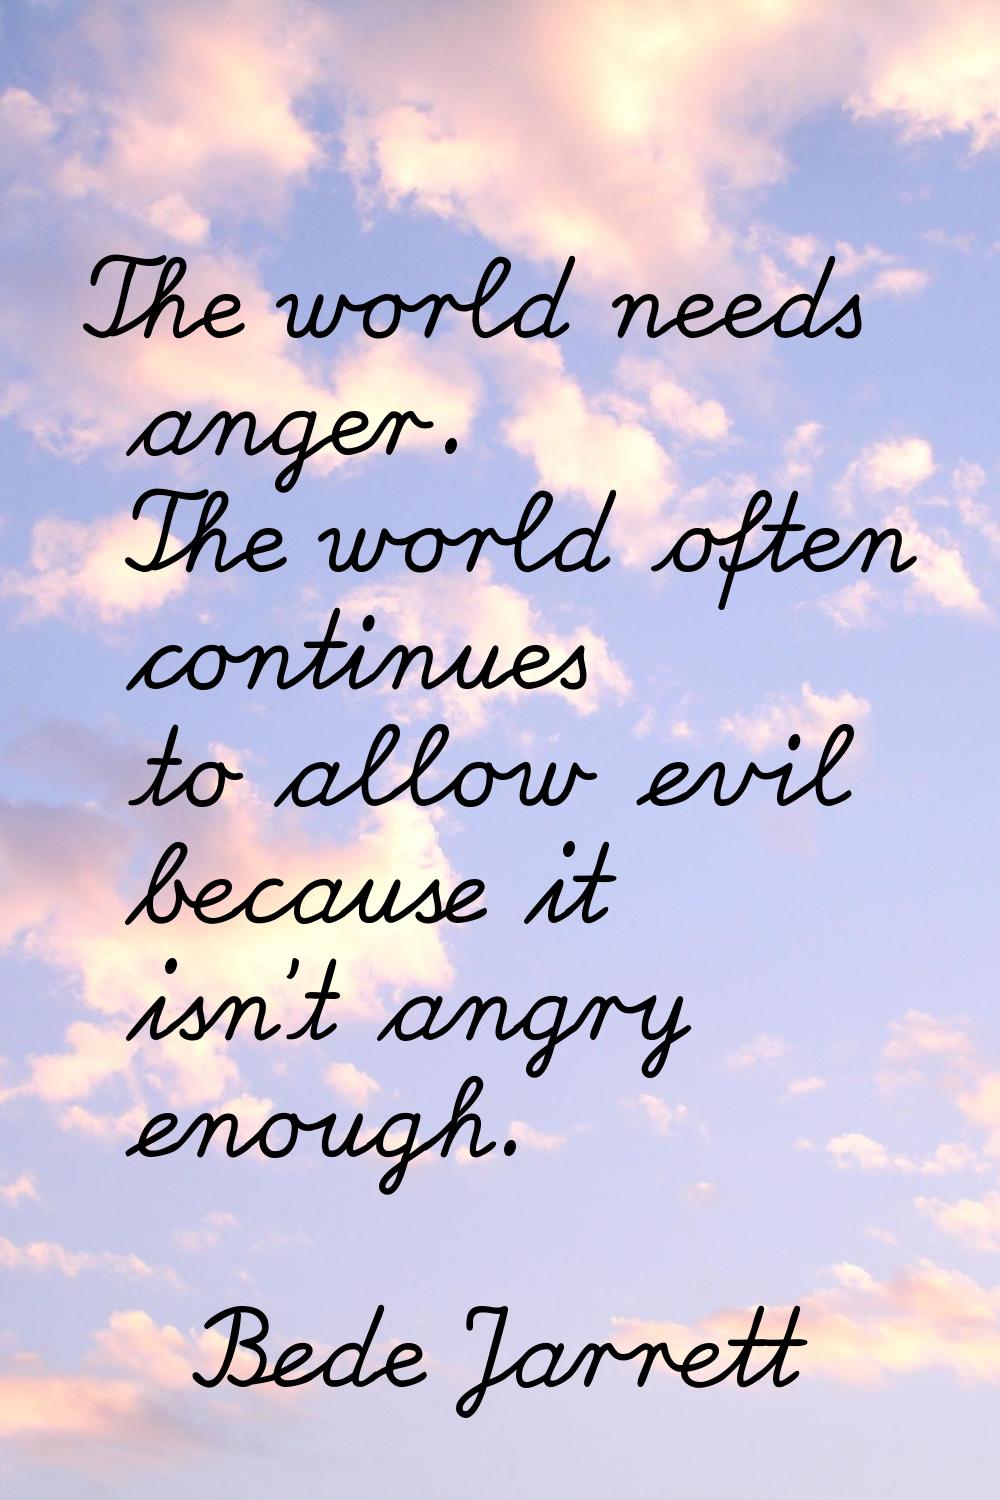 The world needs anger. The world often continues to allow evil because it isn't angry enough.